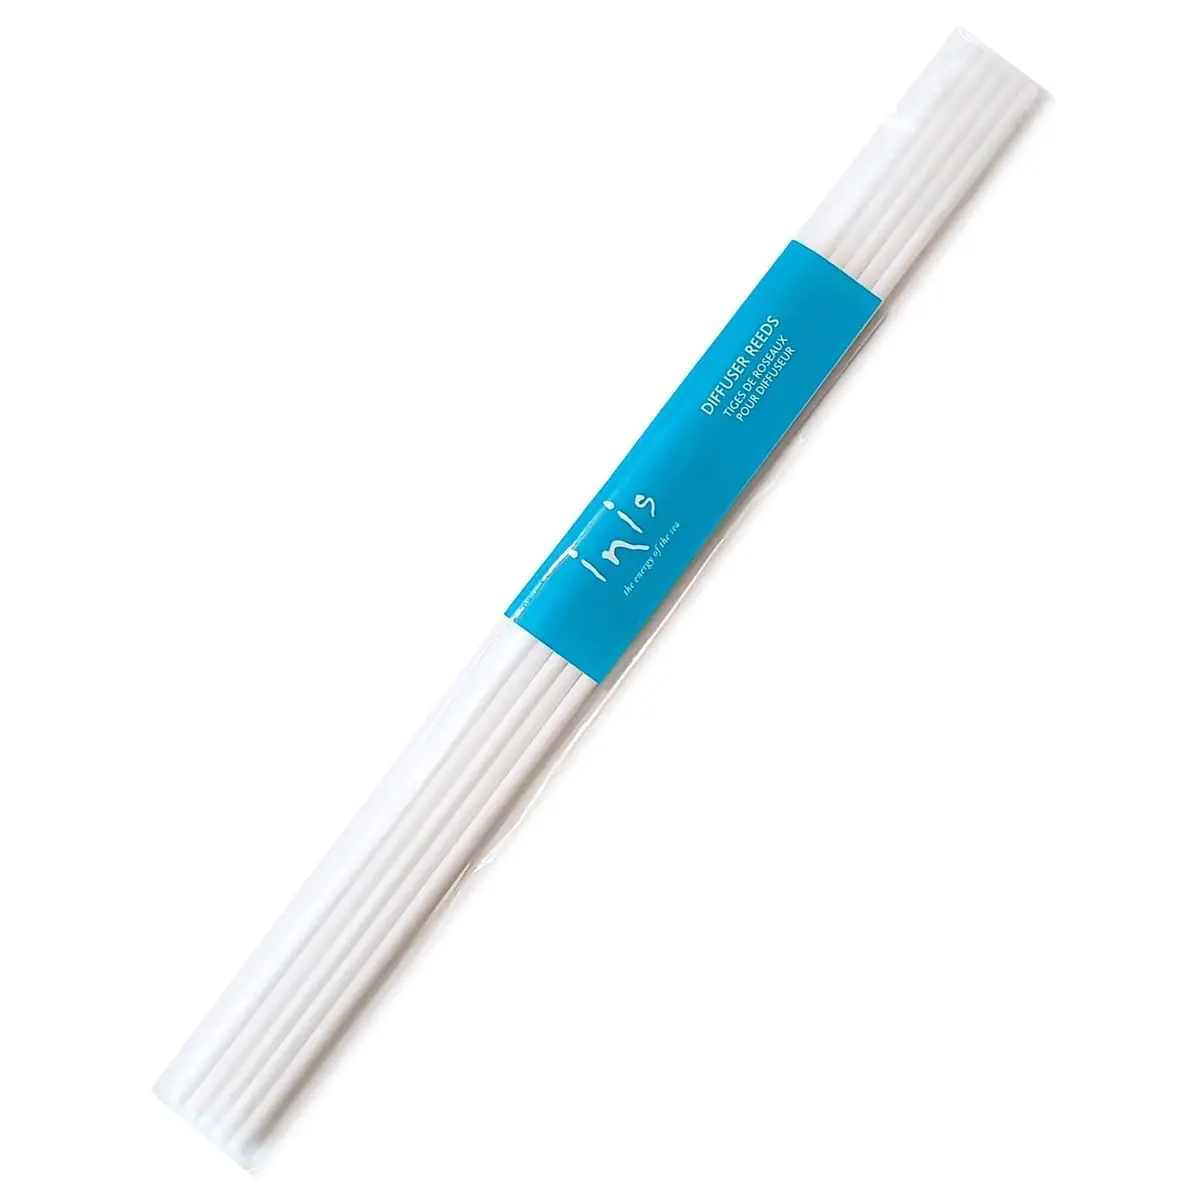 pack of 5 Inis diffuser reeds